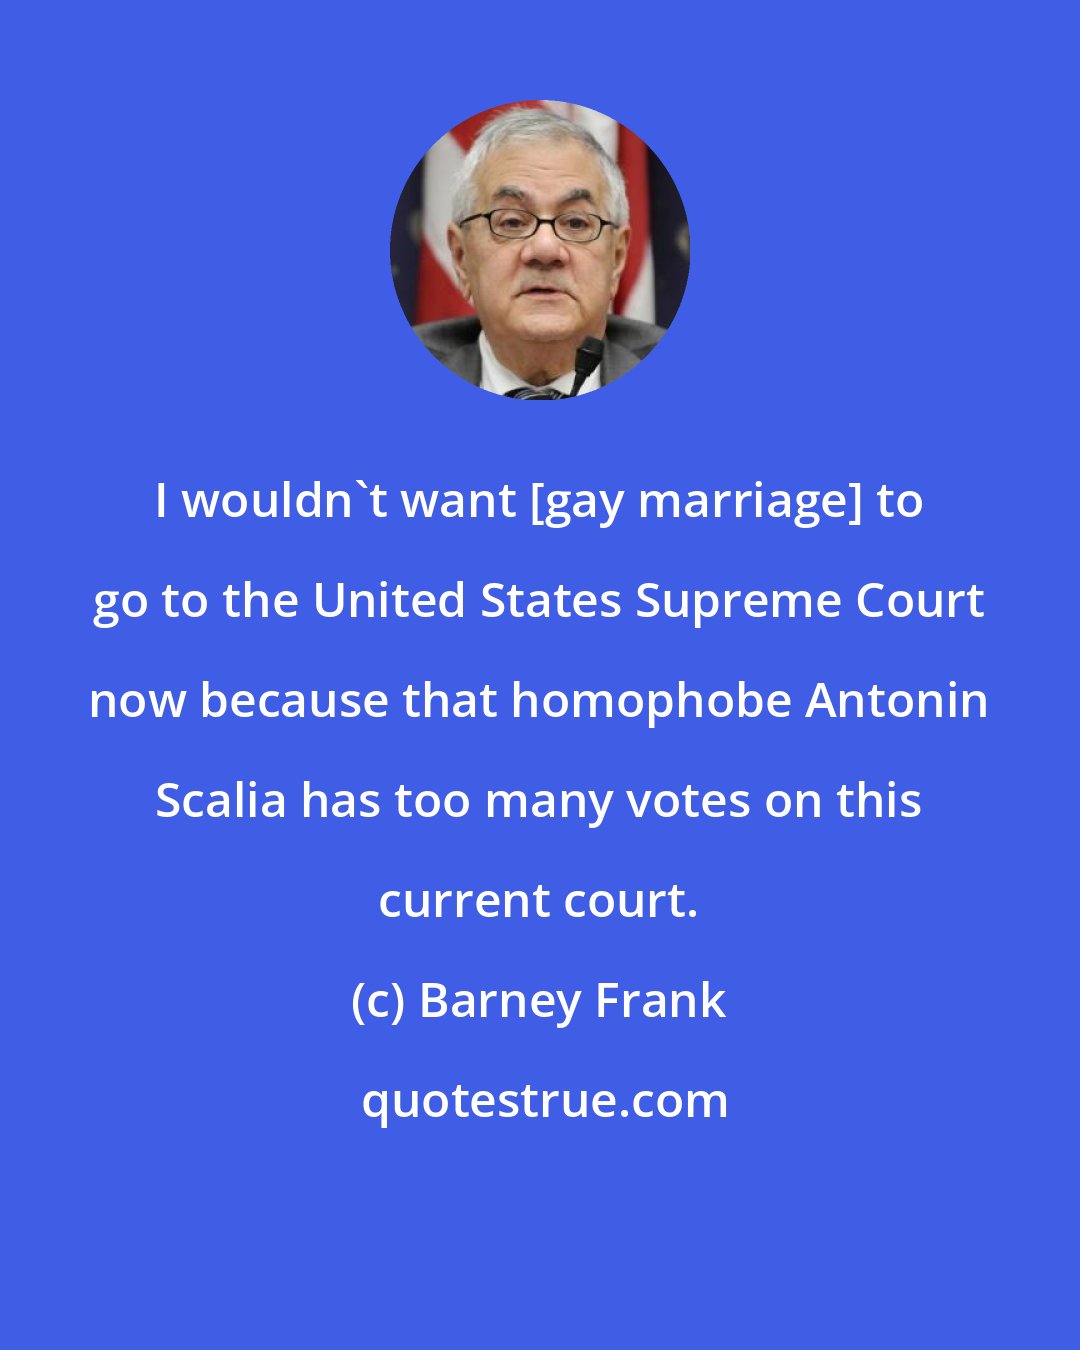 Barney Frank: I wouldn't want [gay marriage] to go to the United States Supreme Court now because that homophobe Antonin Scalia has too many votes on this current court.